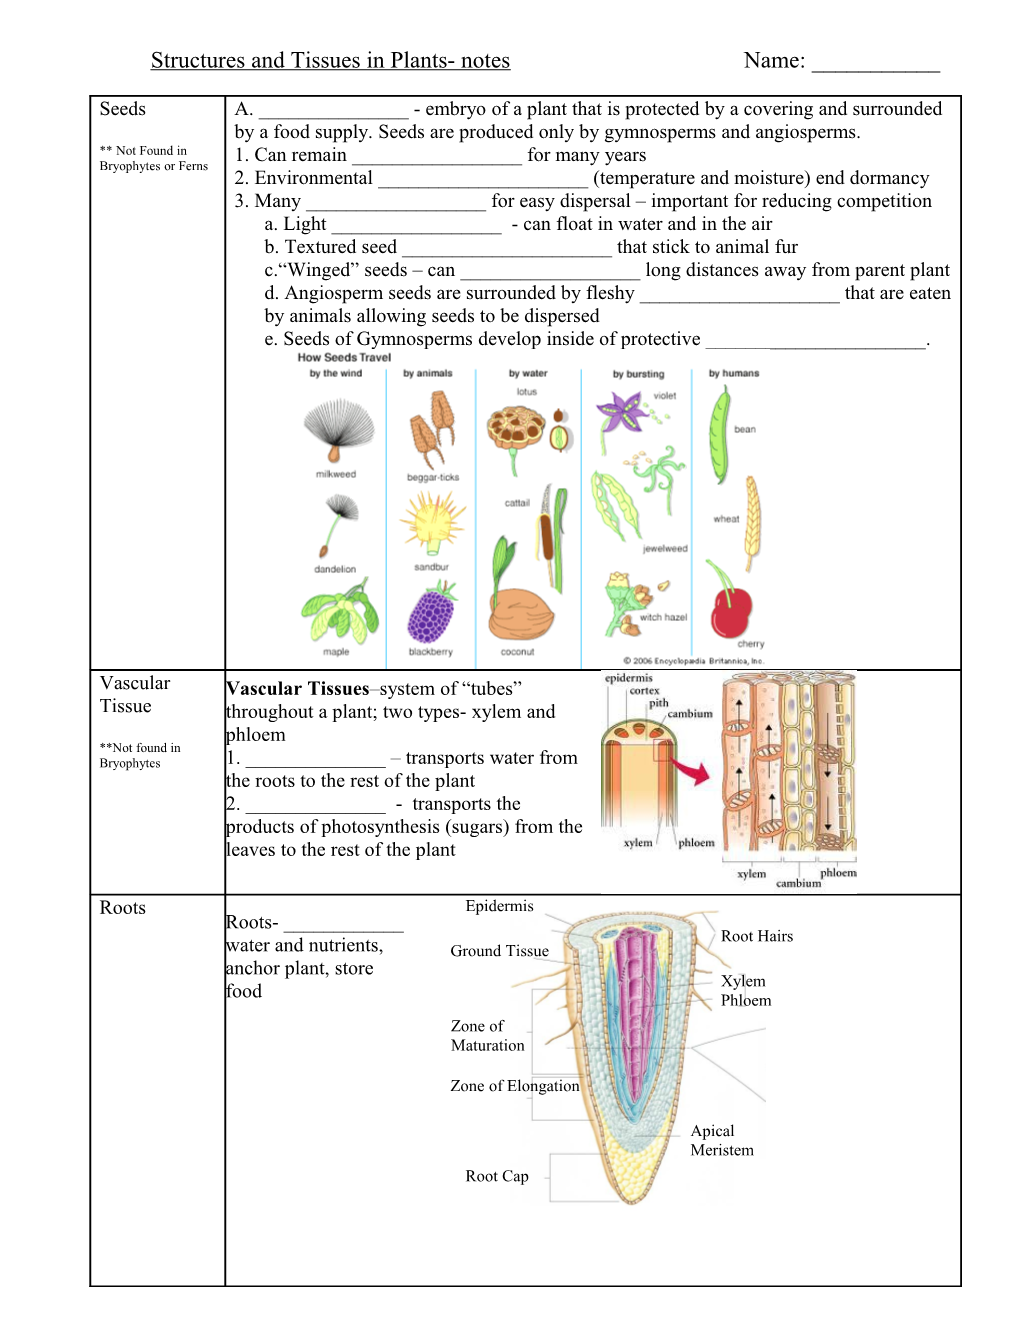 Structures and Tissues in Plants- Notes